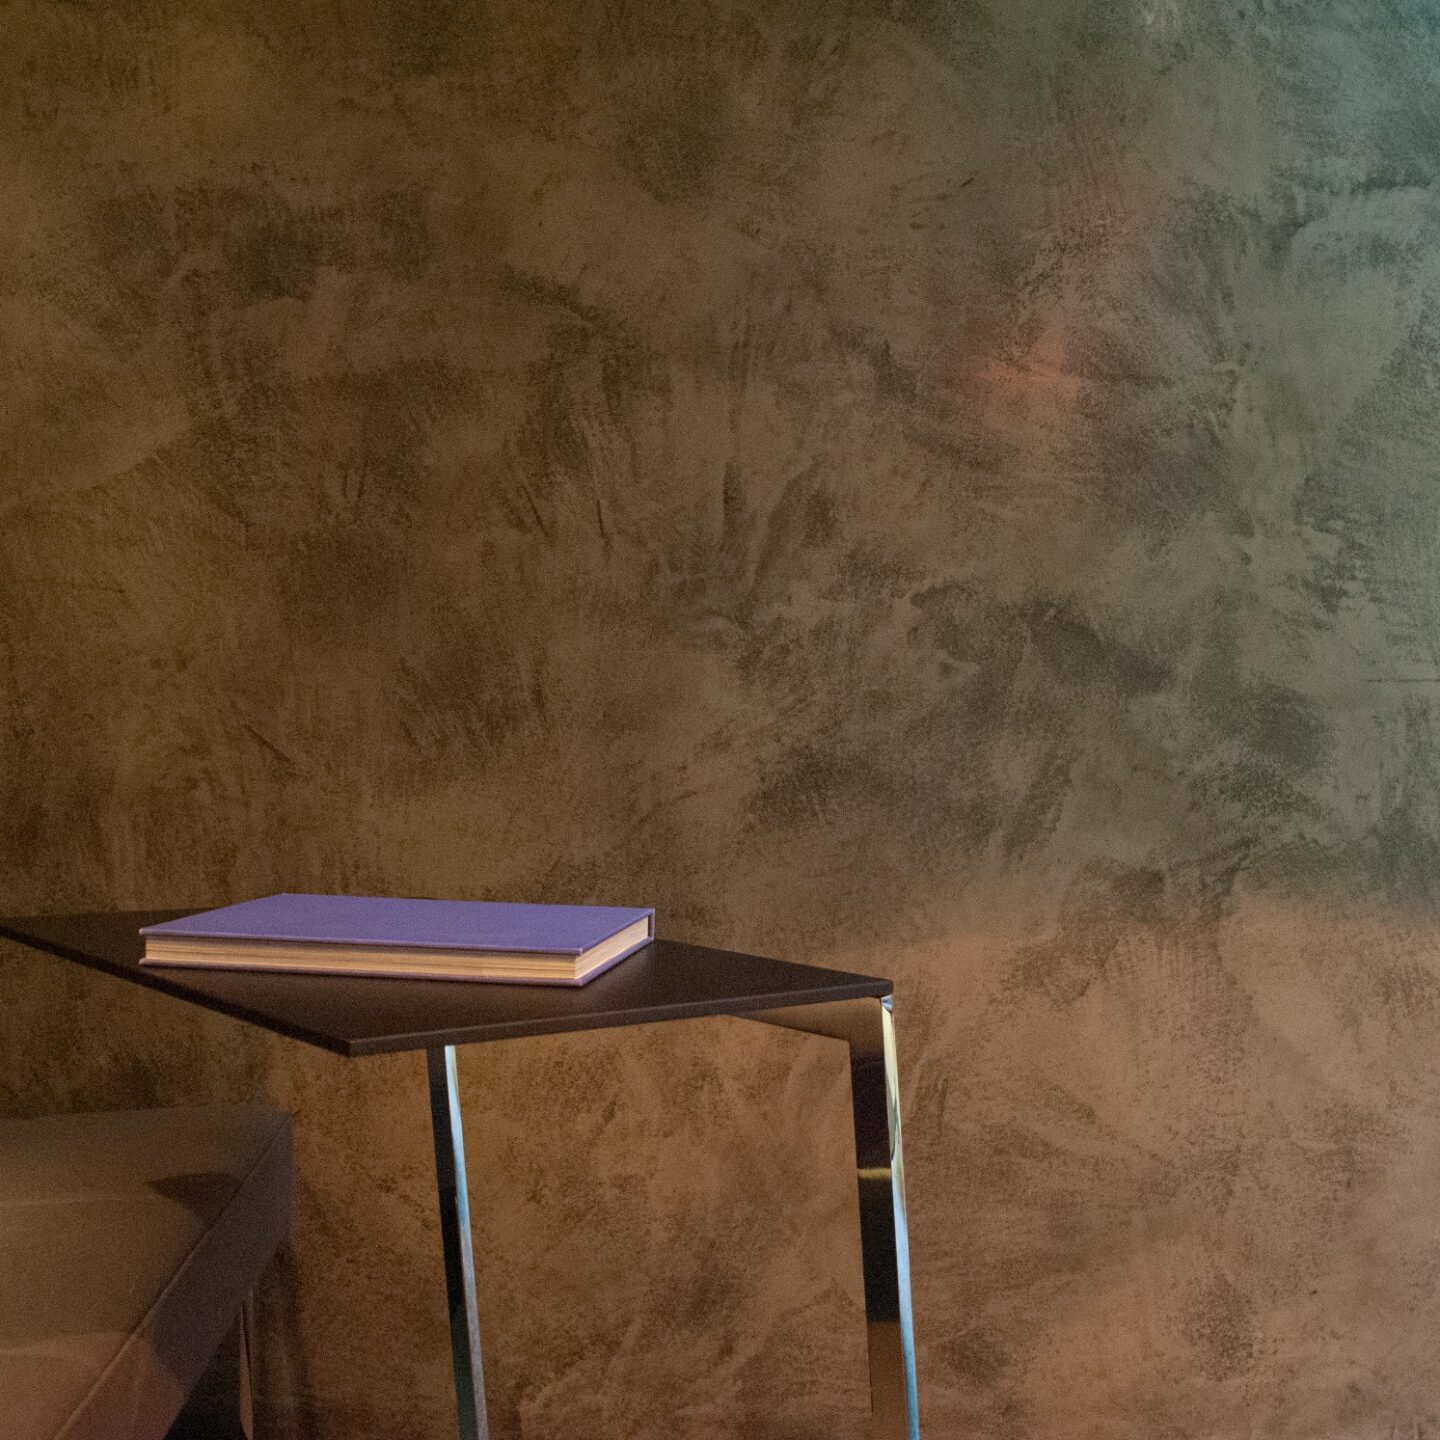 Chair and table in front of wall using Armourcoat Leatherstone Polished Plaster finish, Brunner showroom